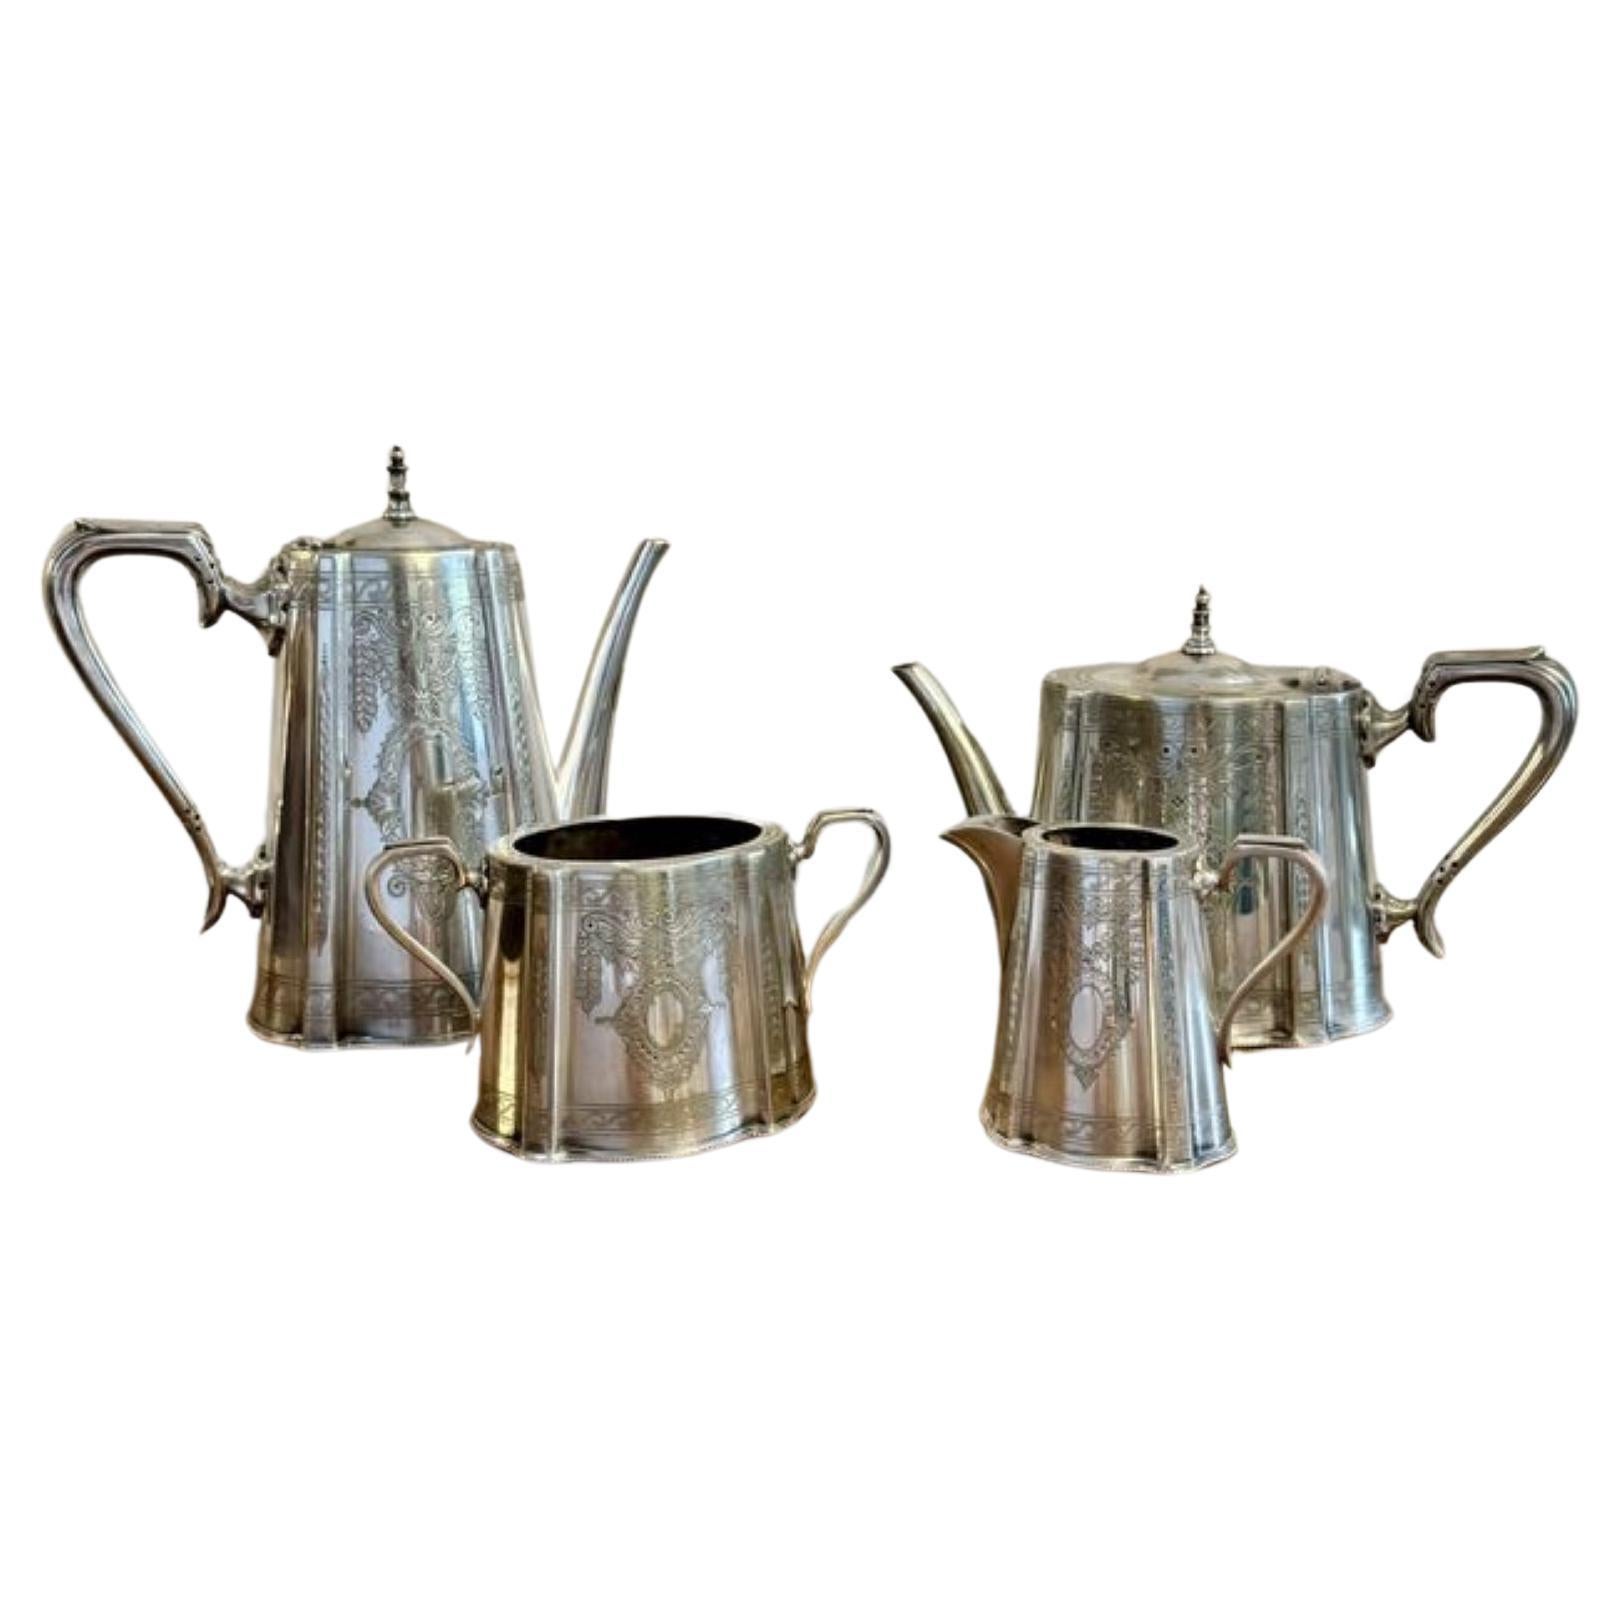 Stunning quality antique Edwardian four piece tea set by Walker and Hall  For Sale